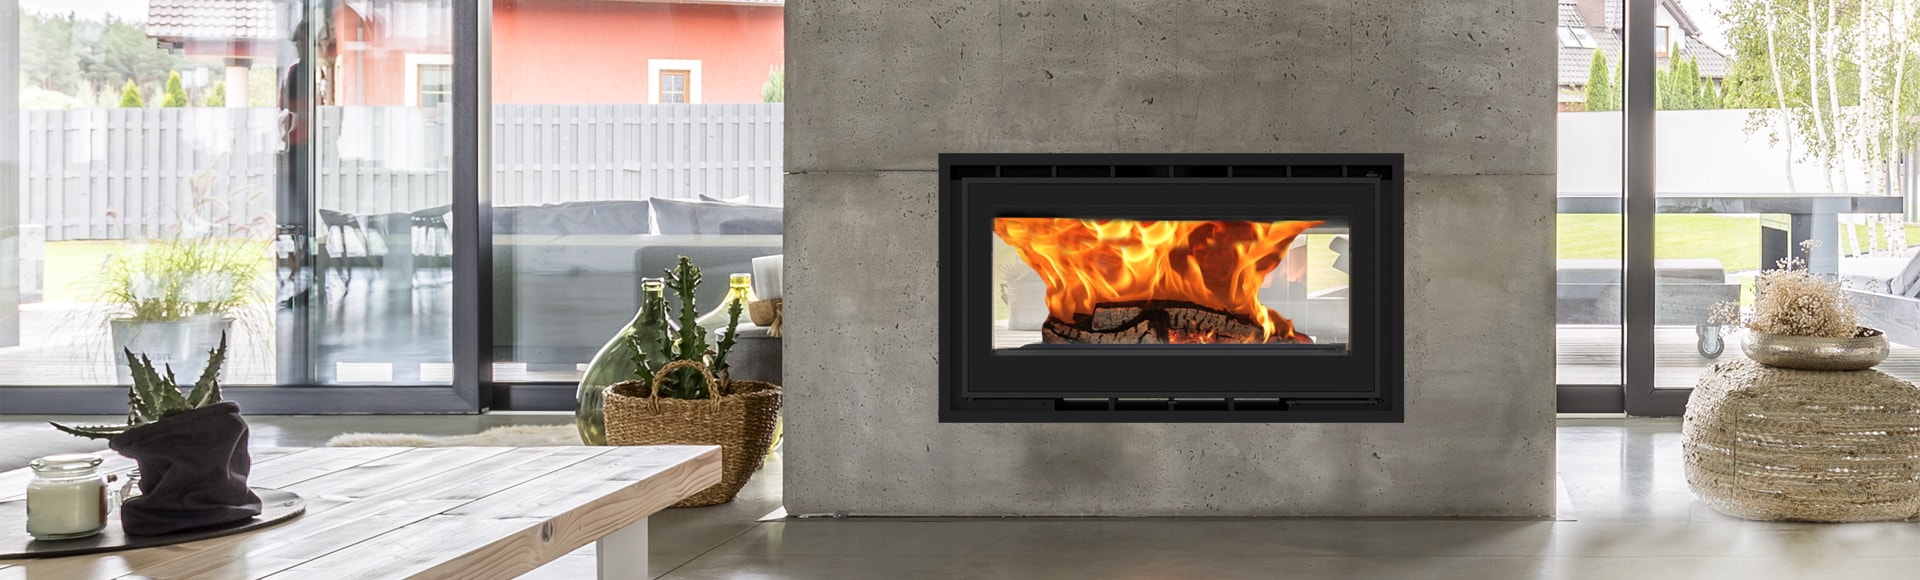 Adf double-sided stove